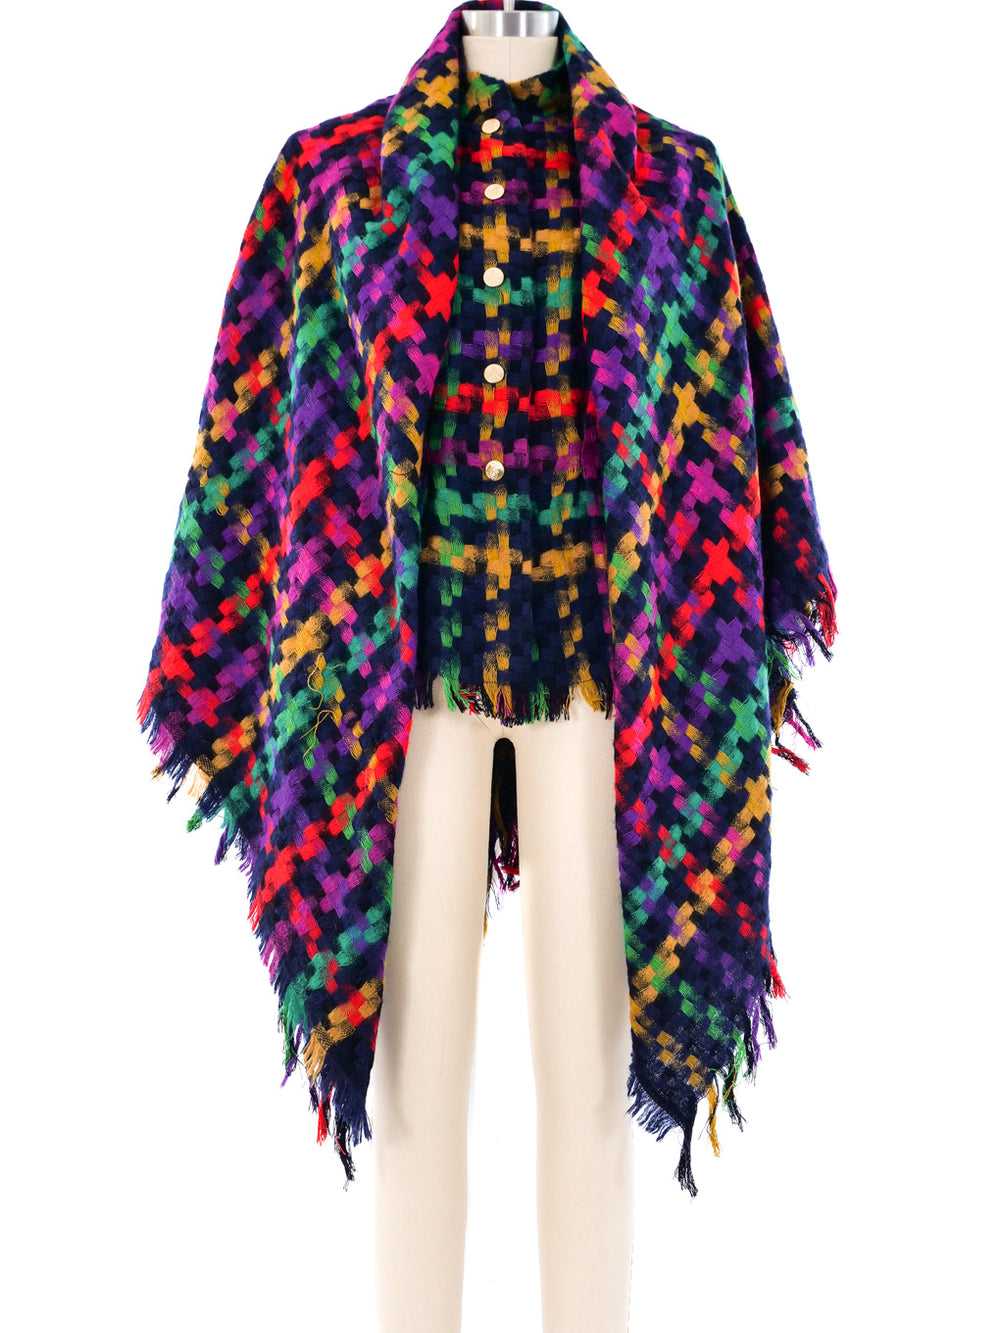 Pauline Trigere Woven Blazer with Scarf - image 2